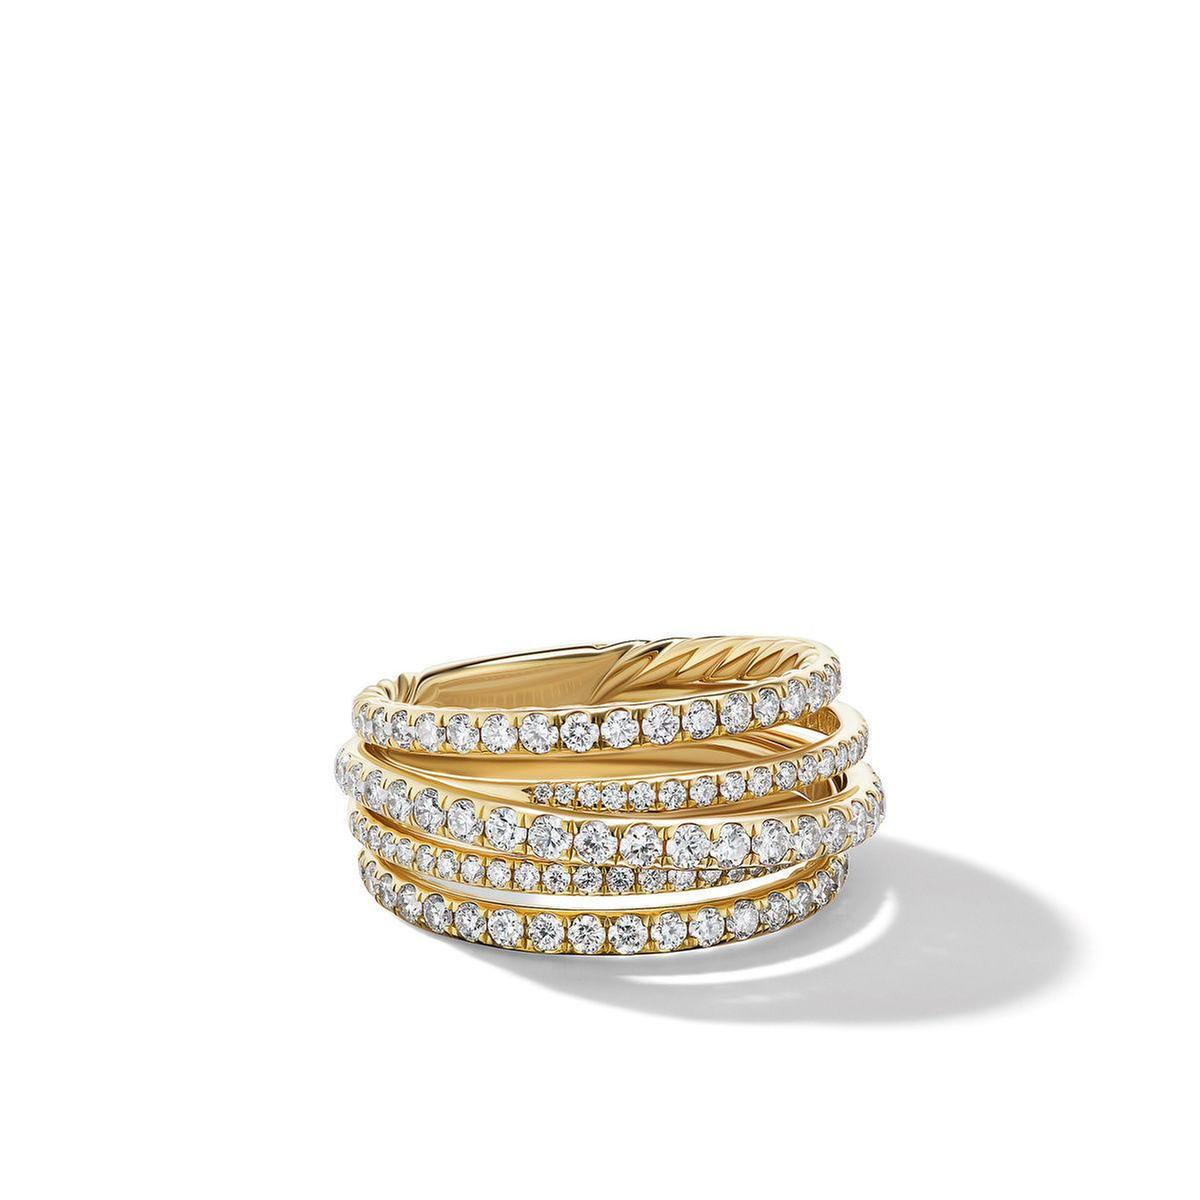 David Yurman Pave Crossover Ring in 18K Yellow Gold with Diamonds - Size 6